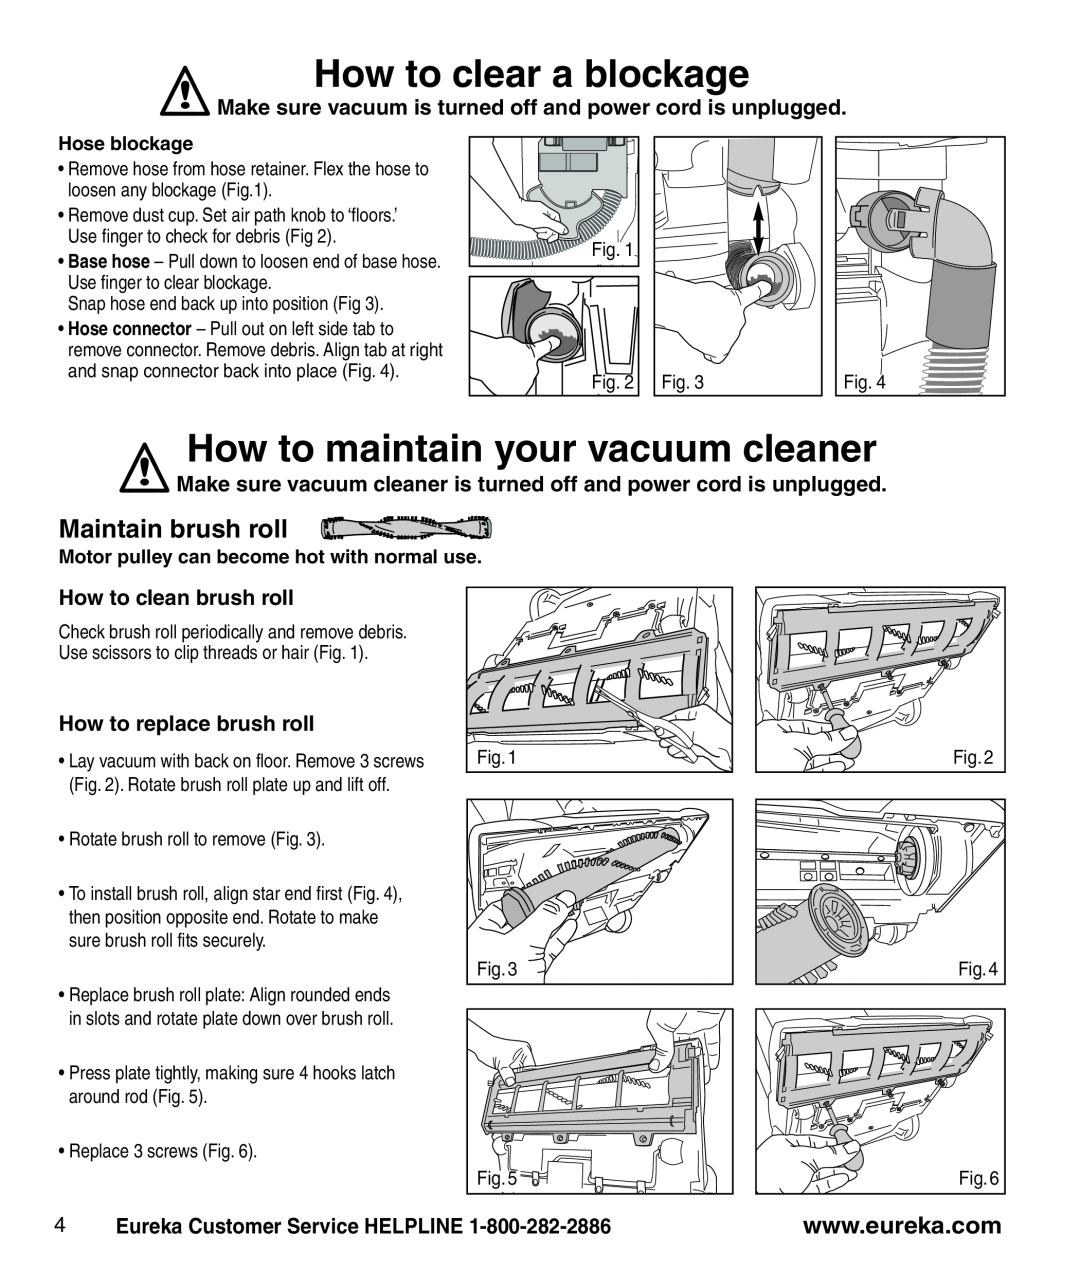 Eureka AS1001A How to clear a blockage, How to maintain your vacuum cleaner, Maintain brush roll, How to clean brush roll 